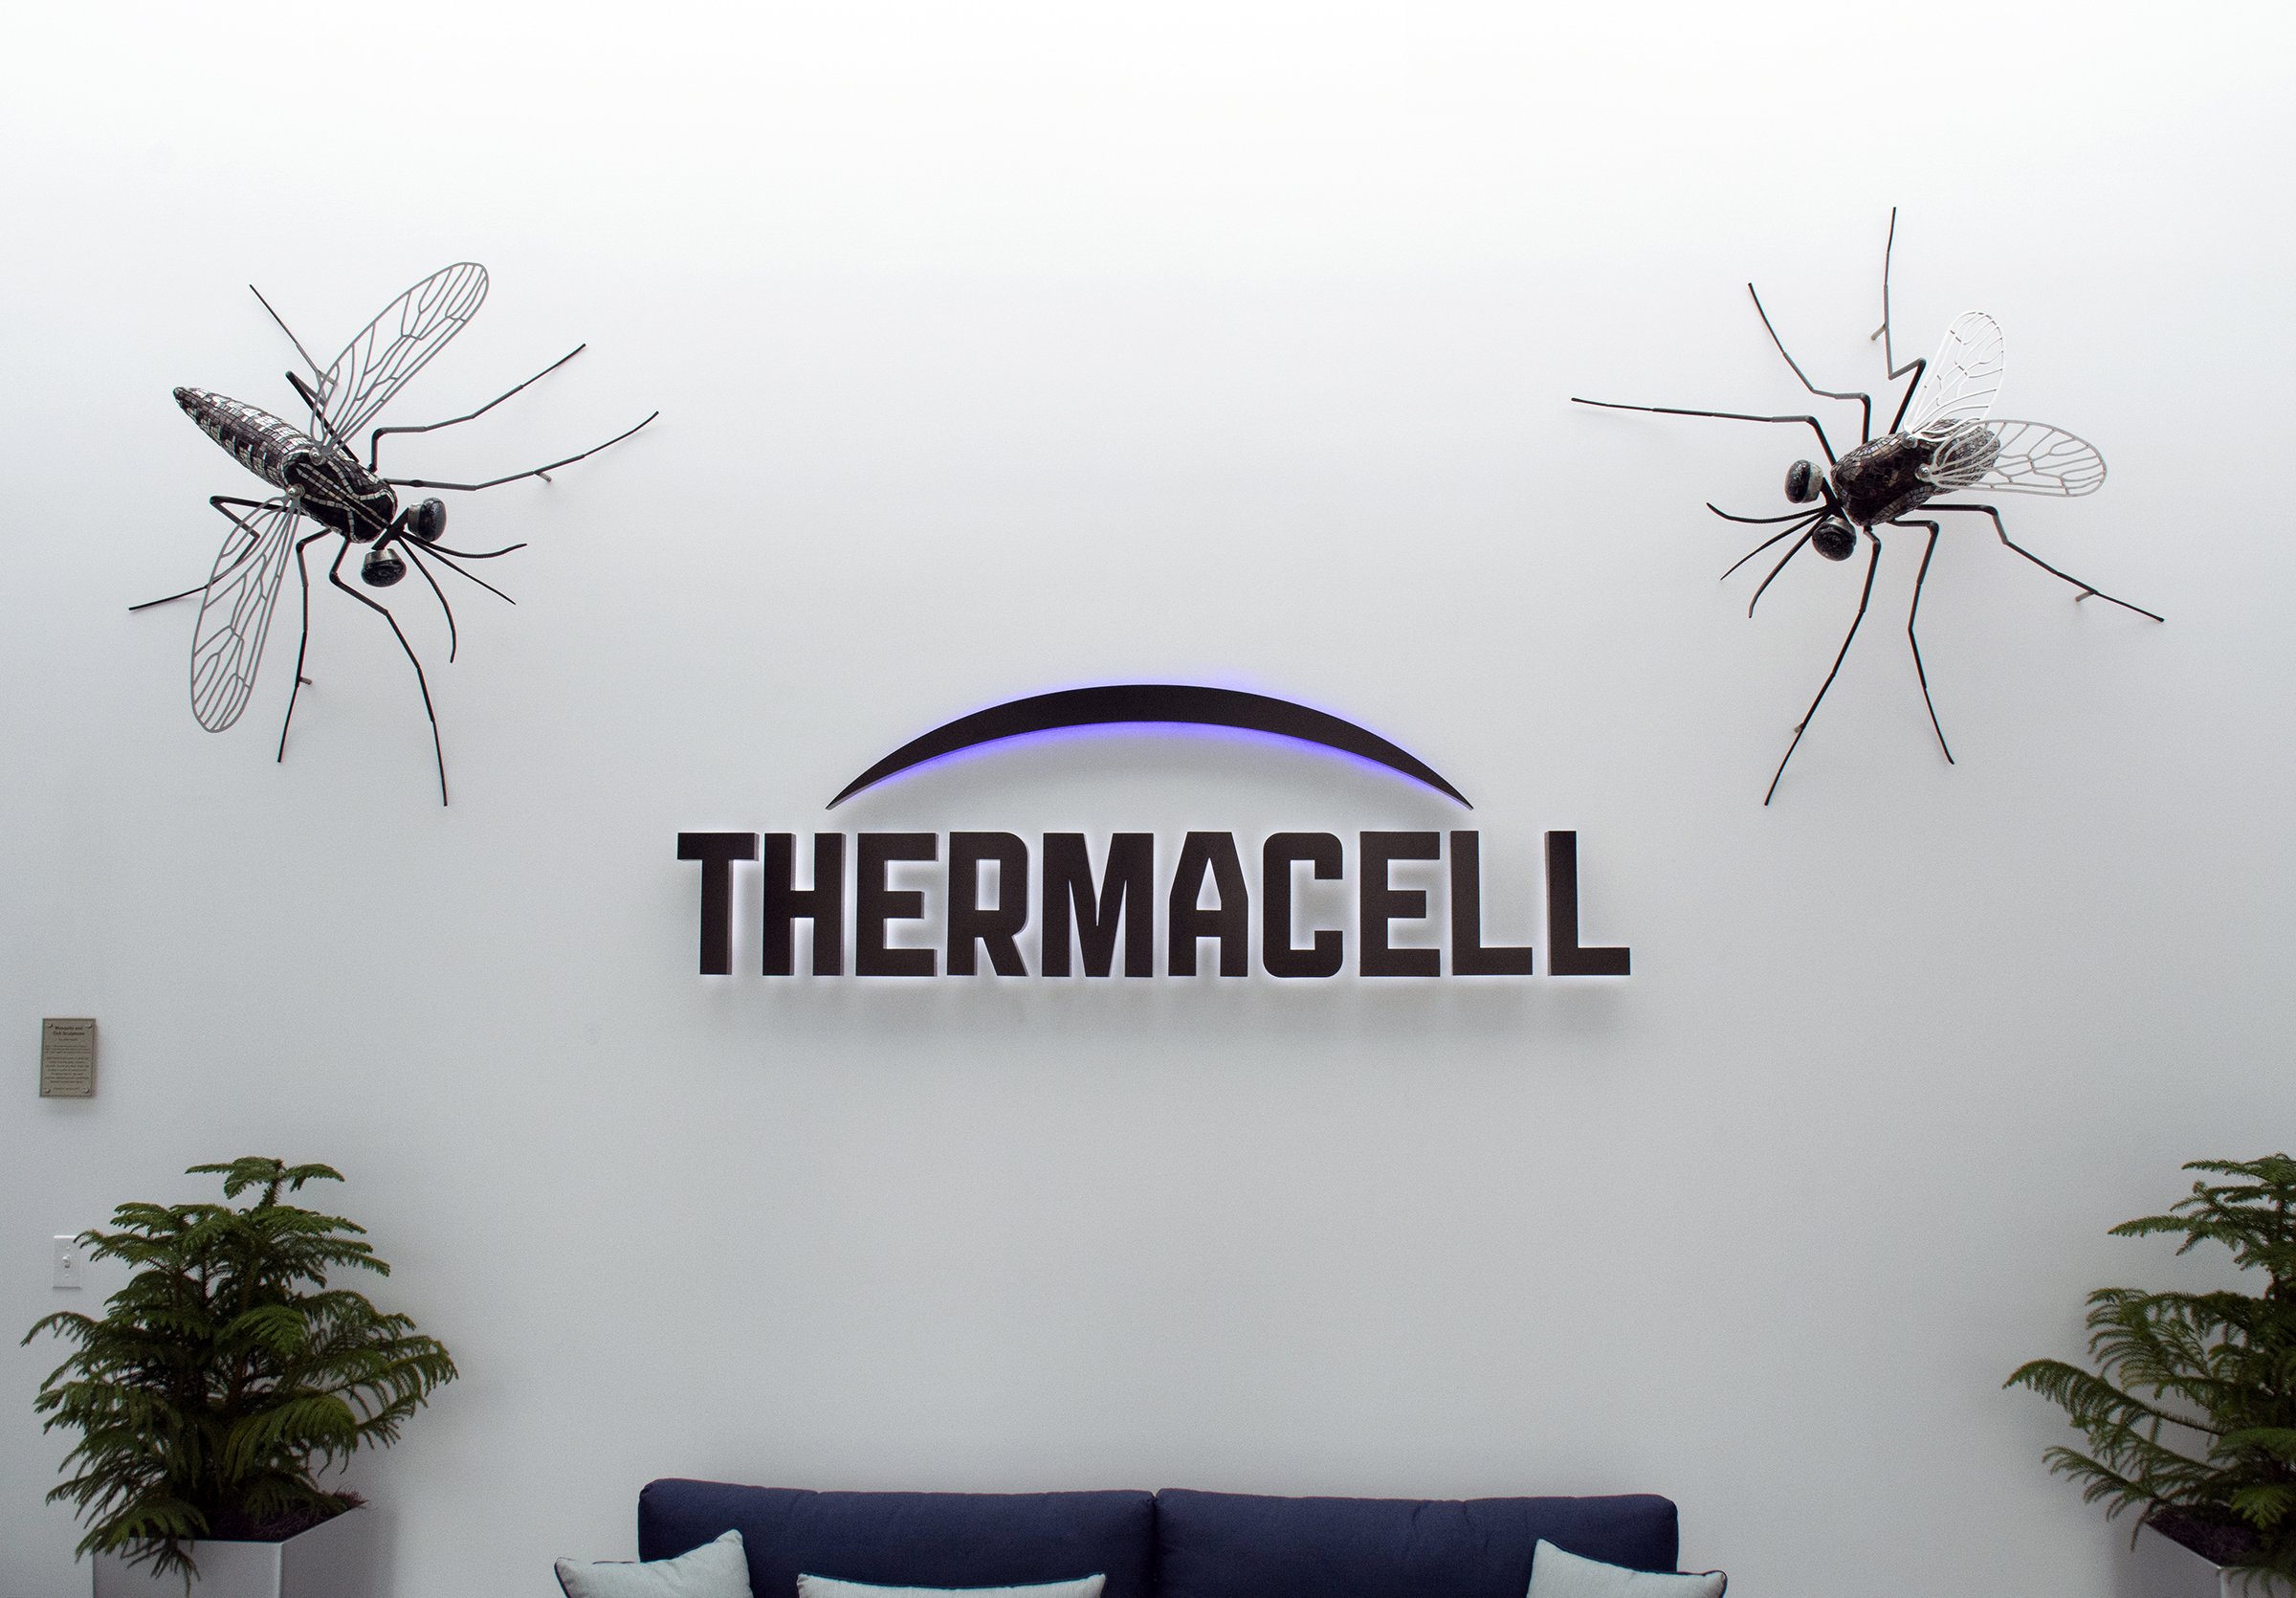 Thermacell.jpg